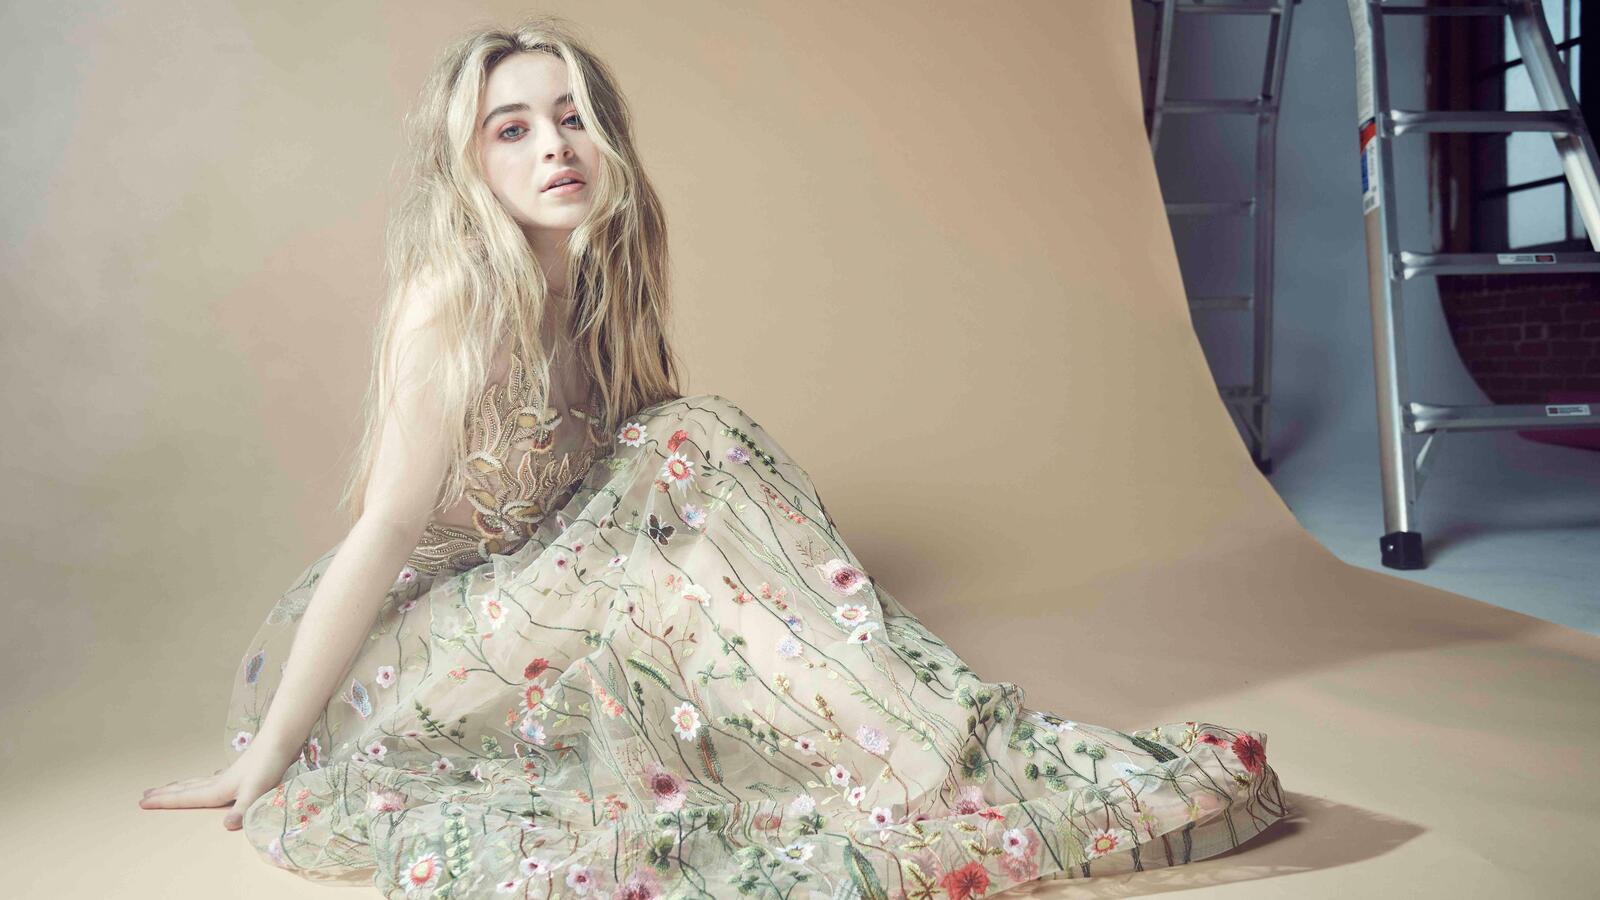 Free photo Light-haired Sabrina Carpenter in a light-colored dress